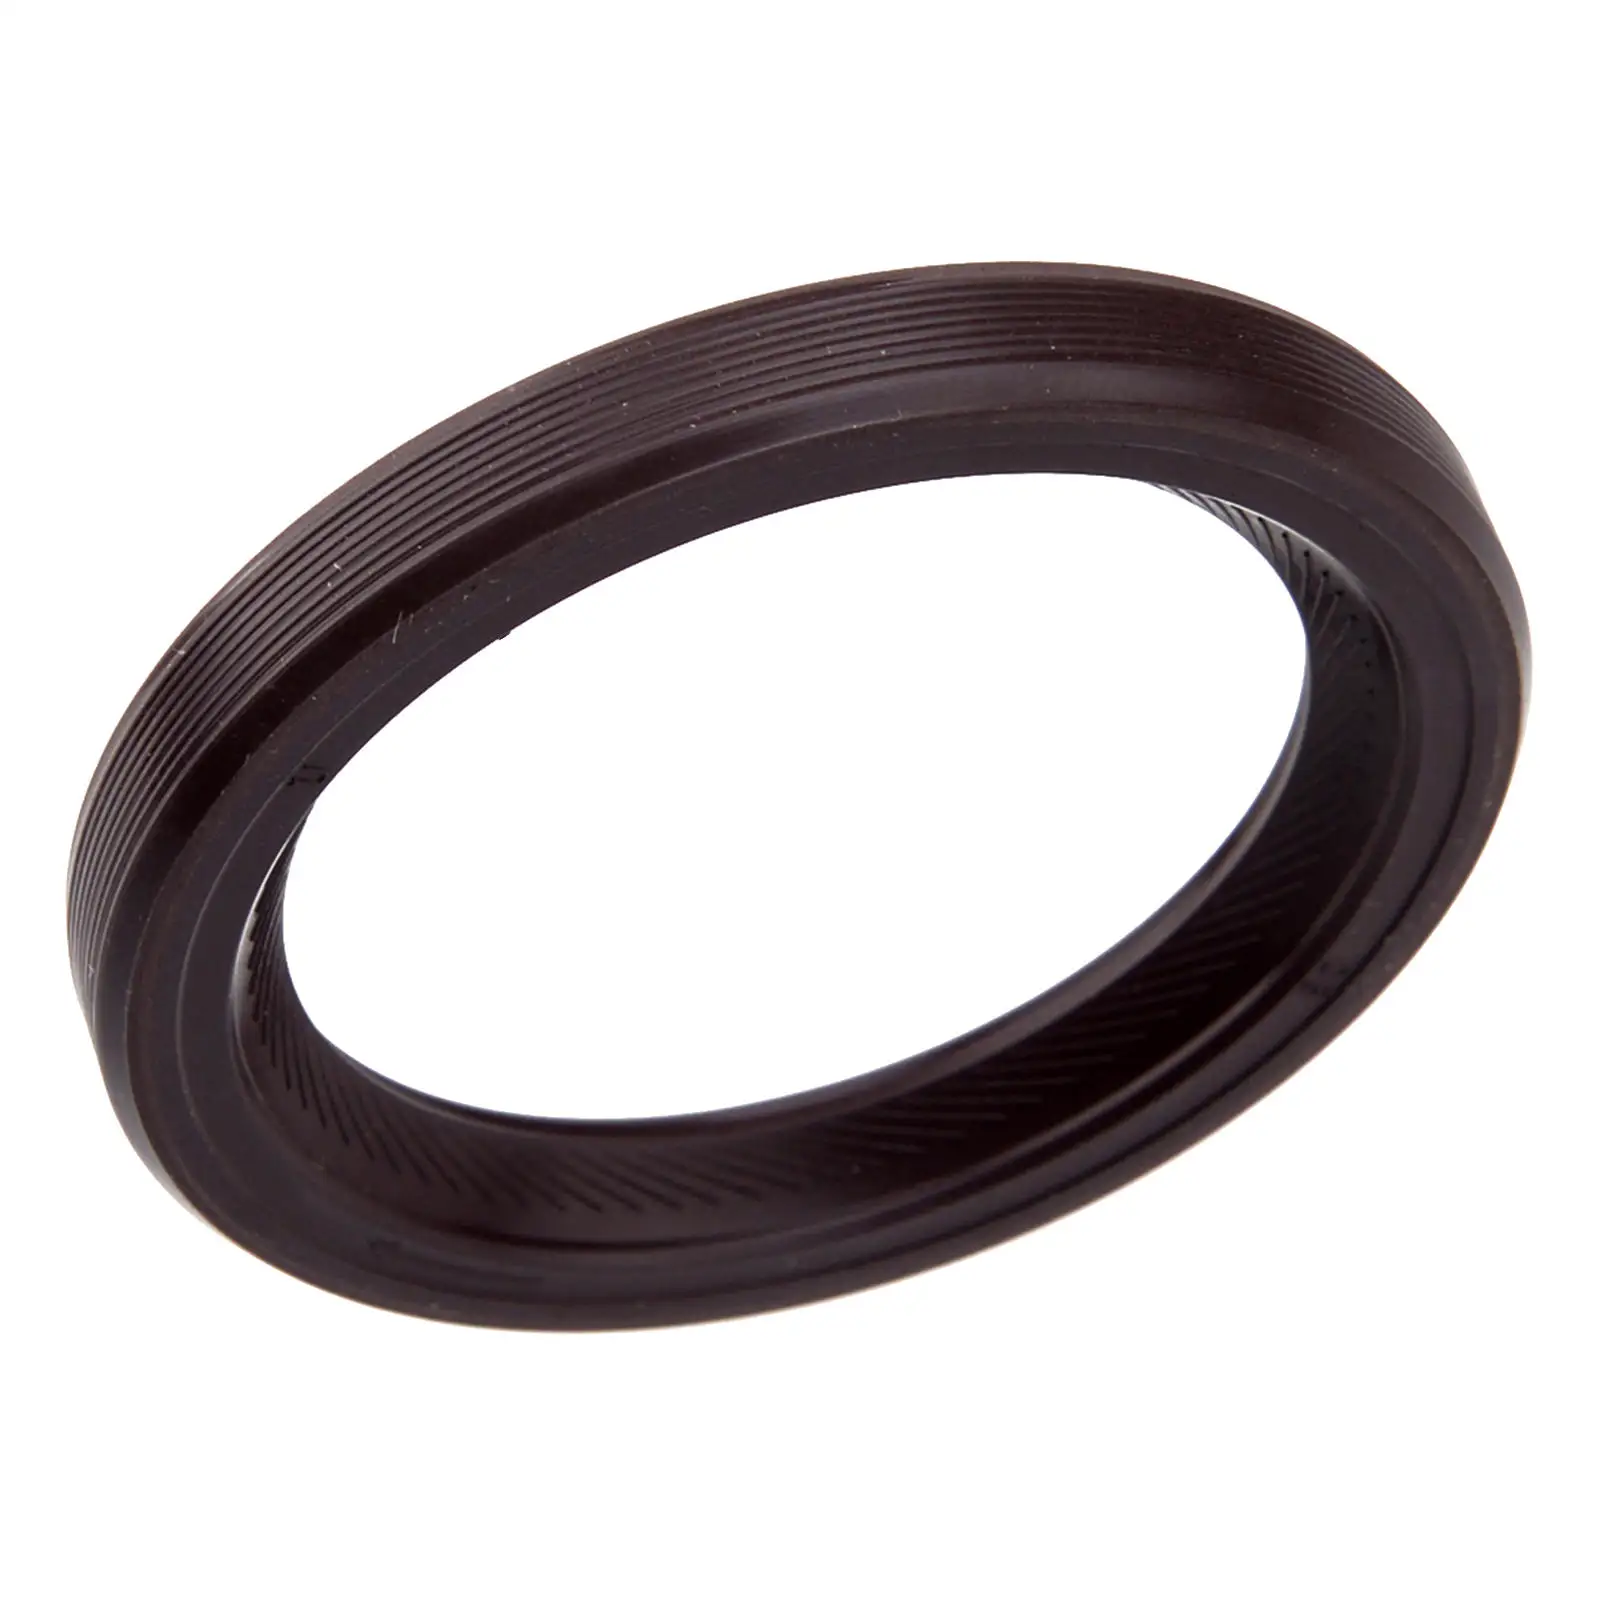 01V Gearcase Oil Seal Replacement DIY Vehicle Parts Transmission Oil Seal Fit for Zf5HP19